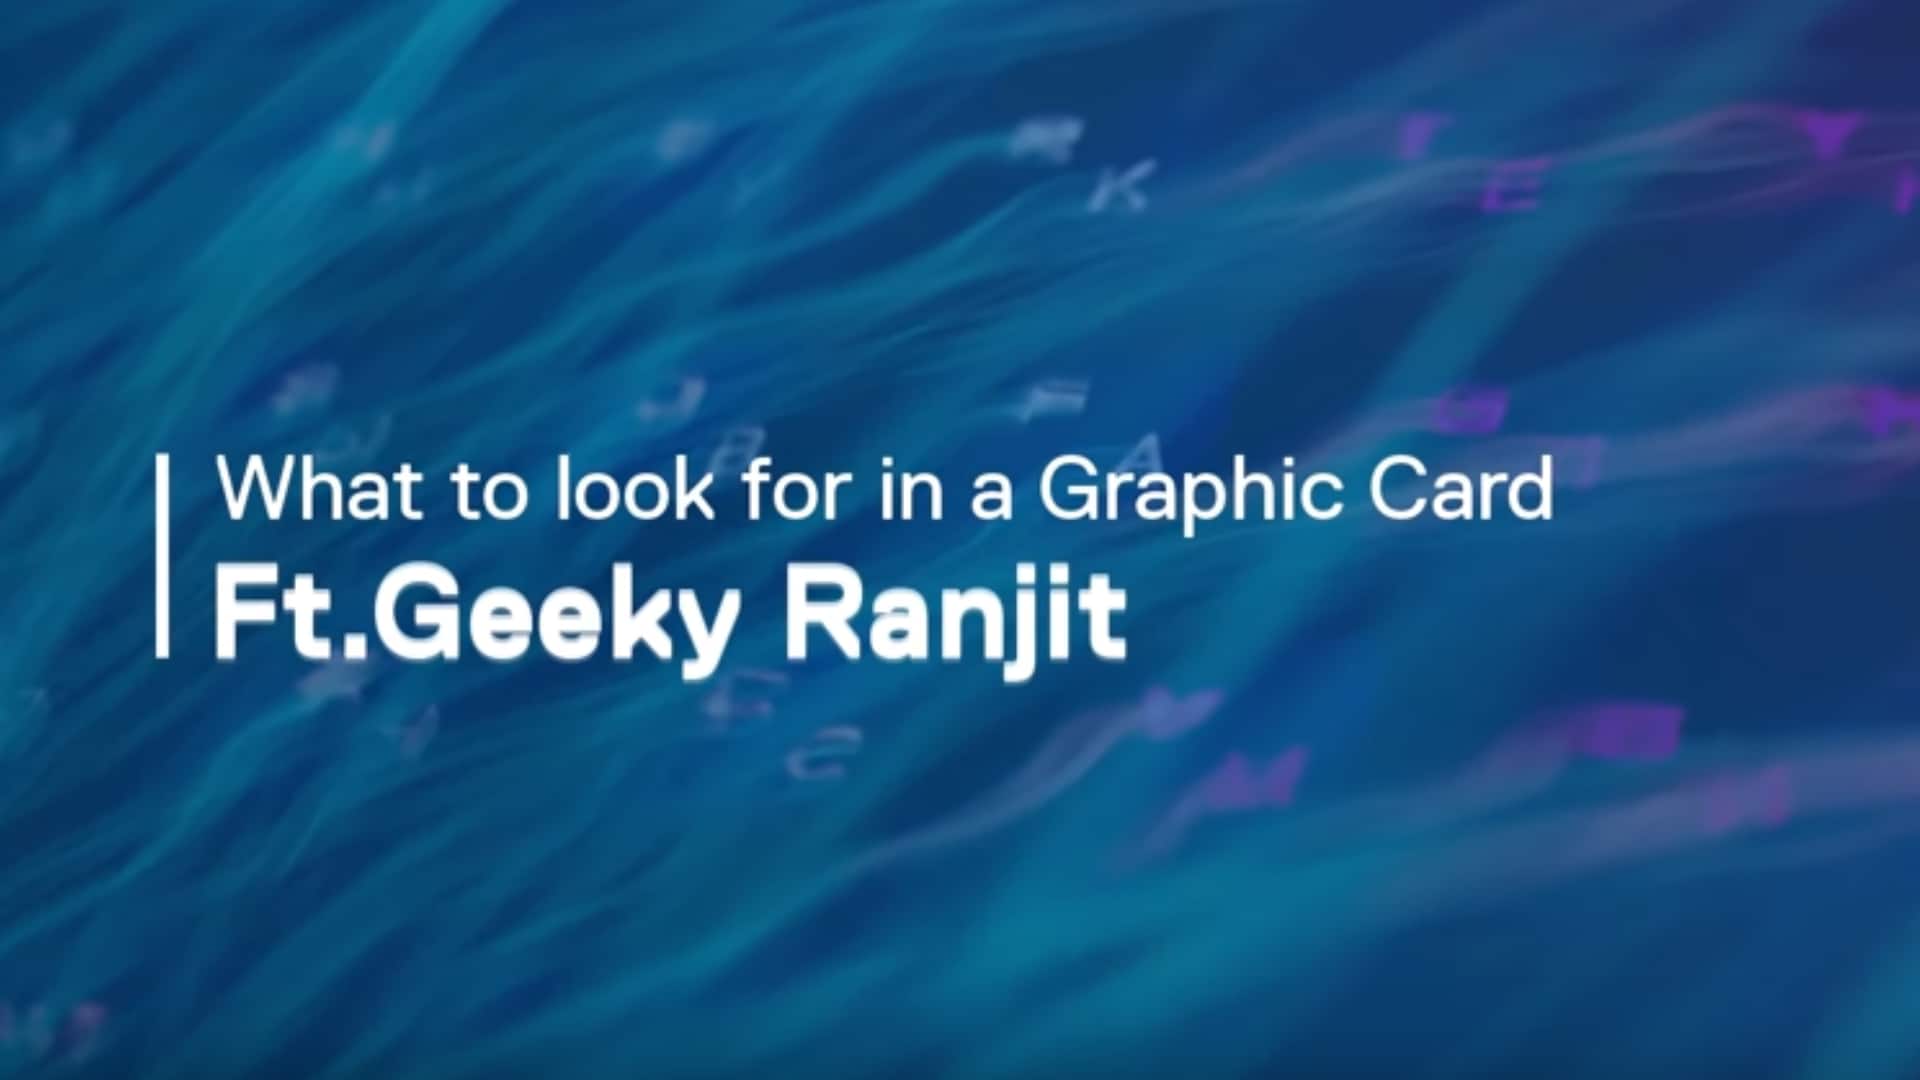 What to look for in a Graphic Card | Techsplained ft. Geeky Ranjit | Dell | Powered by Intel